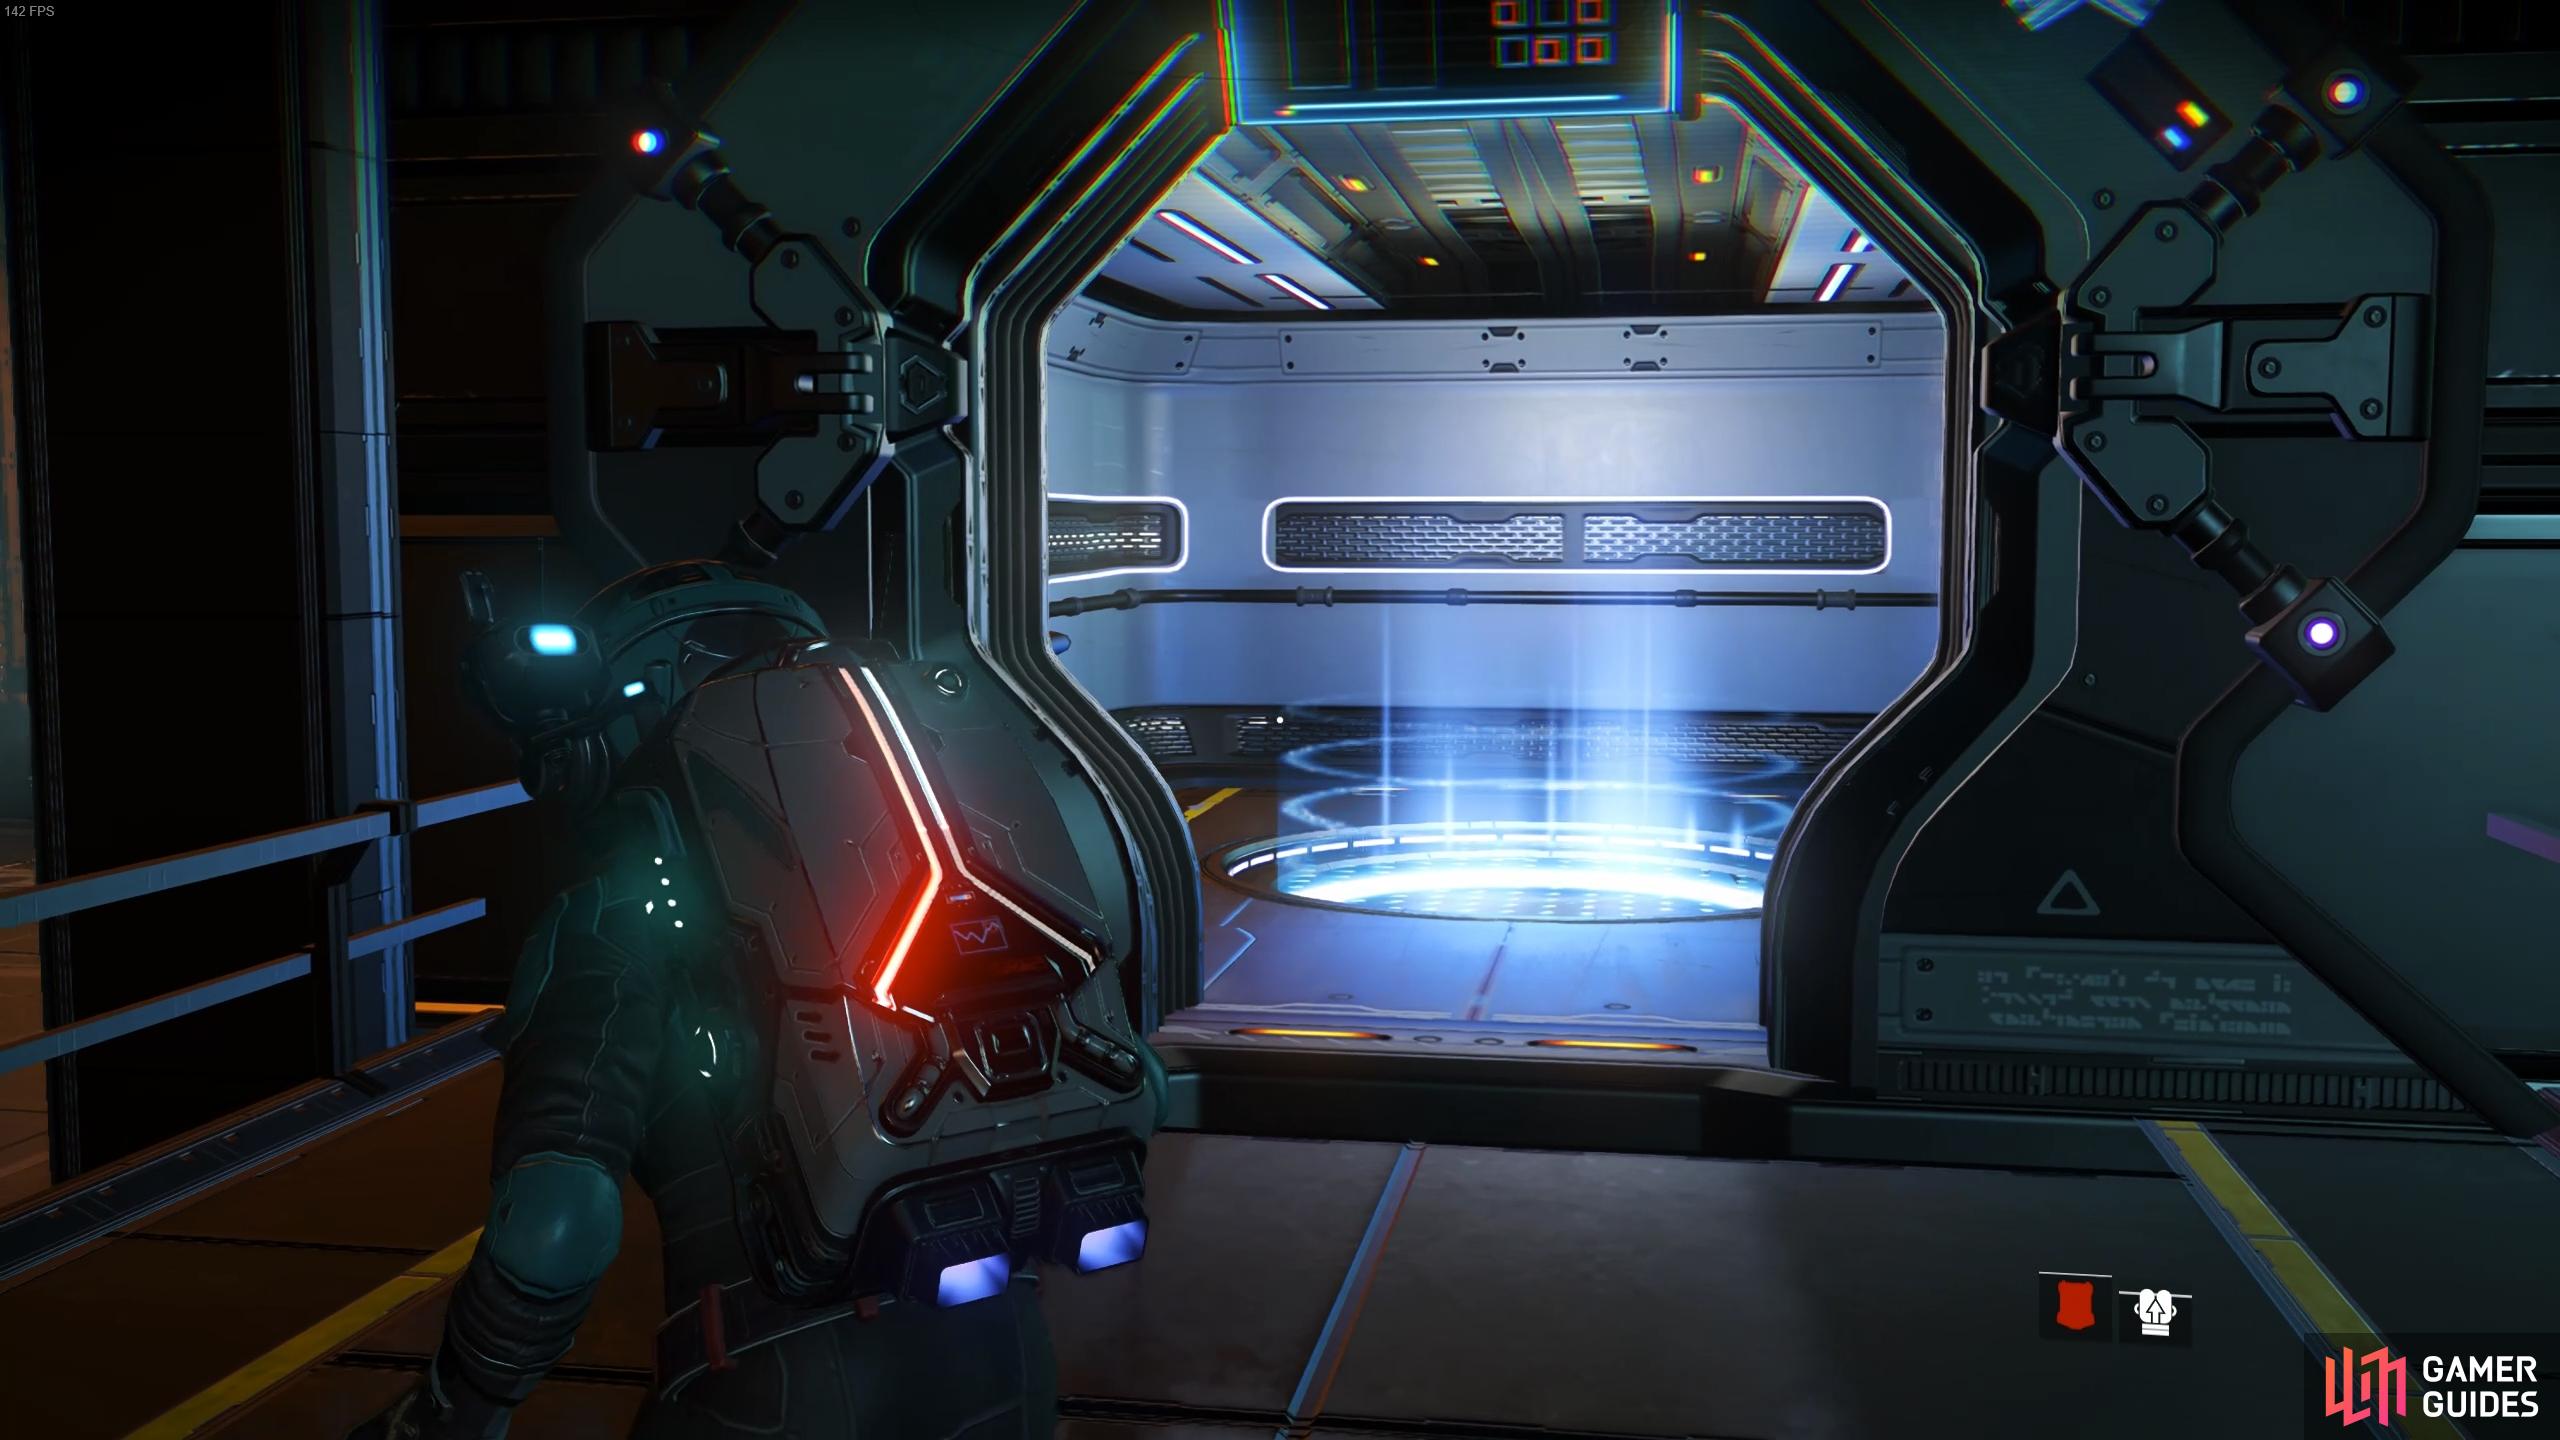 You'll find a teleporter at the centre of the docking bay which brings you to the main command deck.